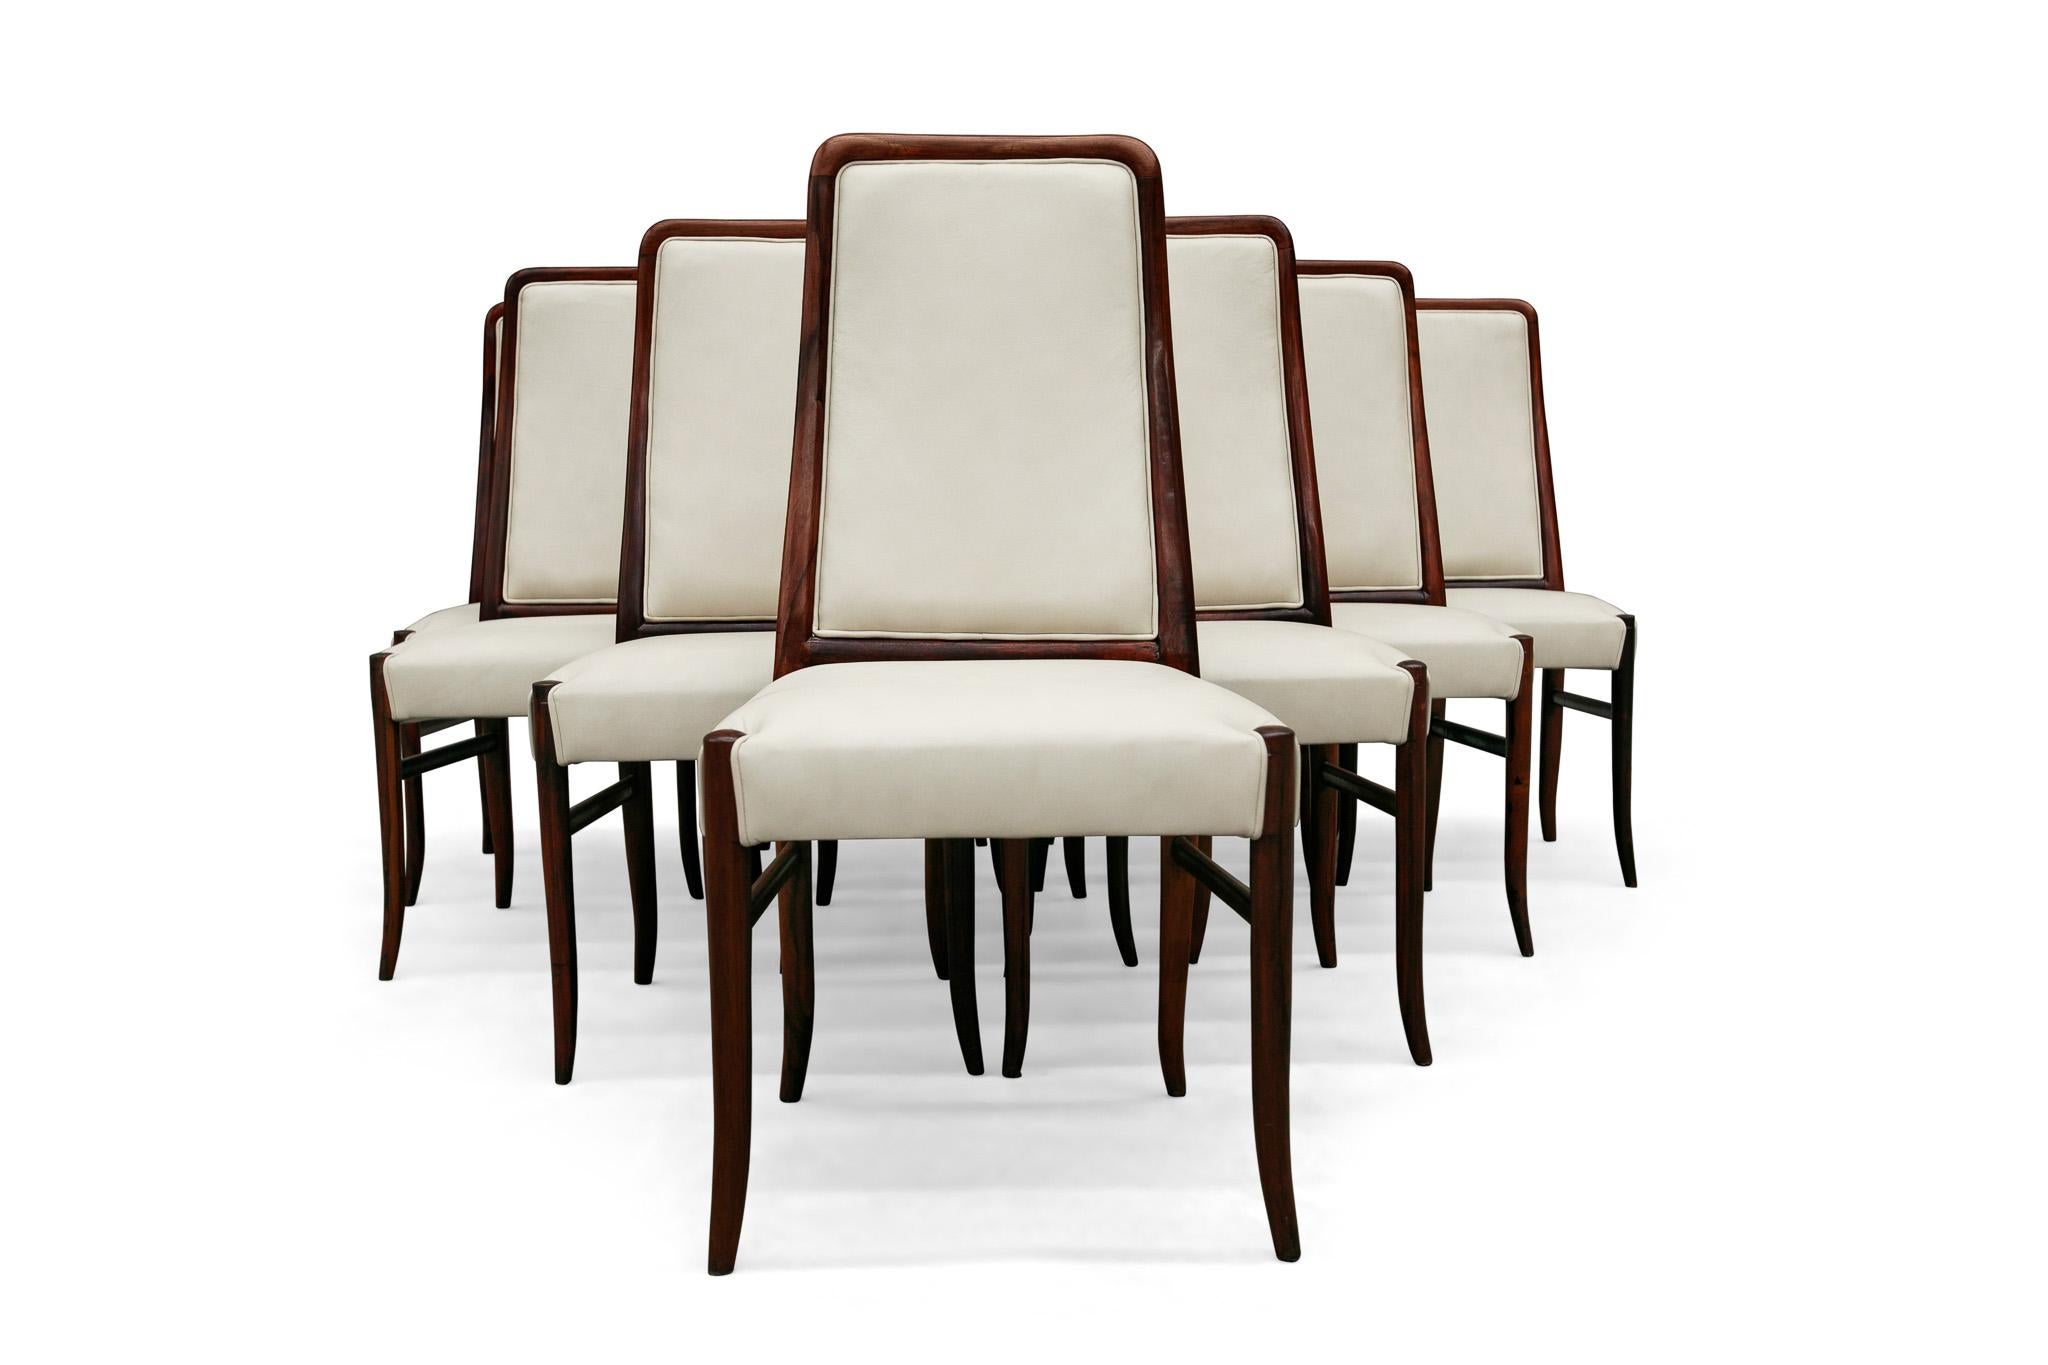 Available today, this magnificent Mid-Century Modern ten dining chair set n hardwood & beige leather by Joaquim Tenreiro in the sixties is the find of the year!

Each chair features a solid Rosewood structure upholstered in beige leather. The legs